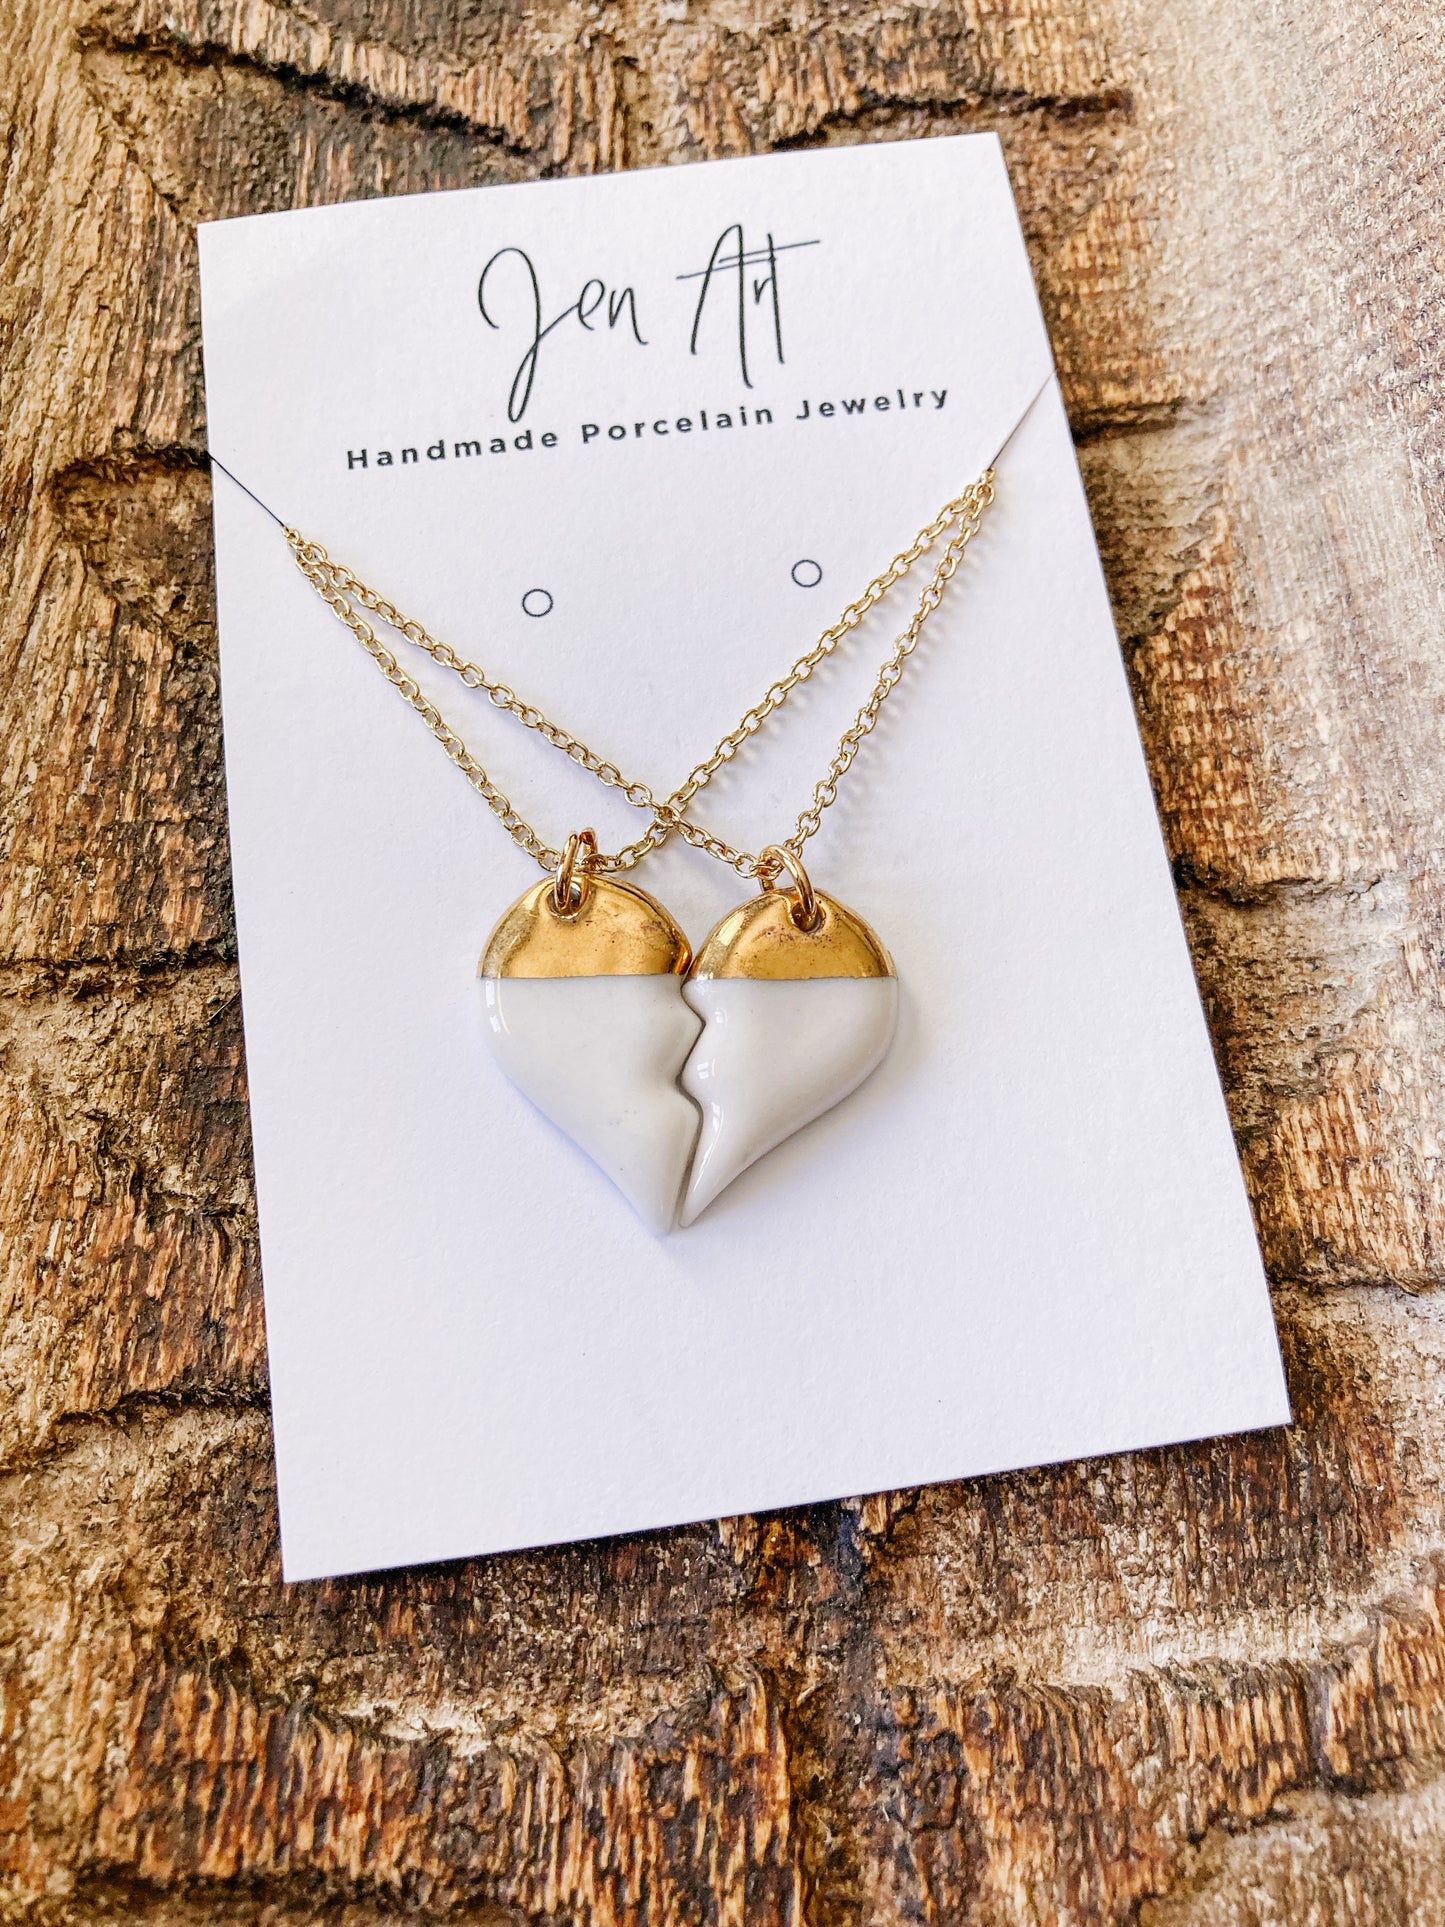 Best Friends Heart Necklace - Porcelain with Gold Luster, Gold Chains by Jen Bretz